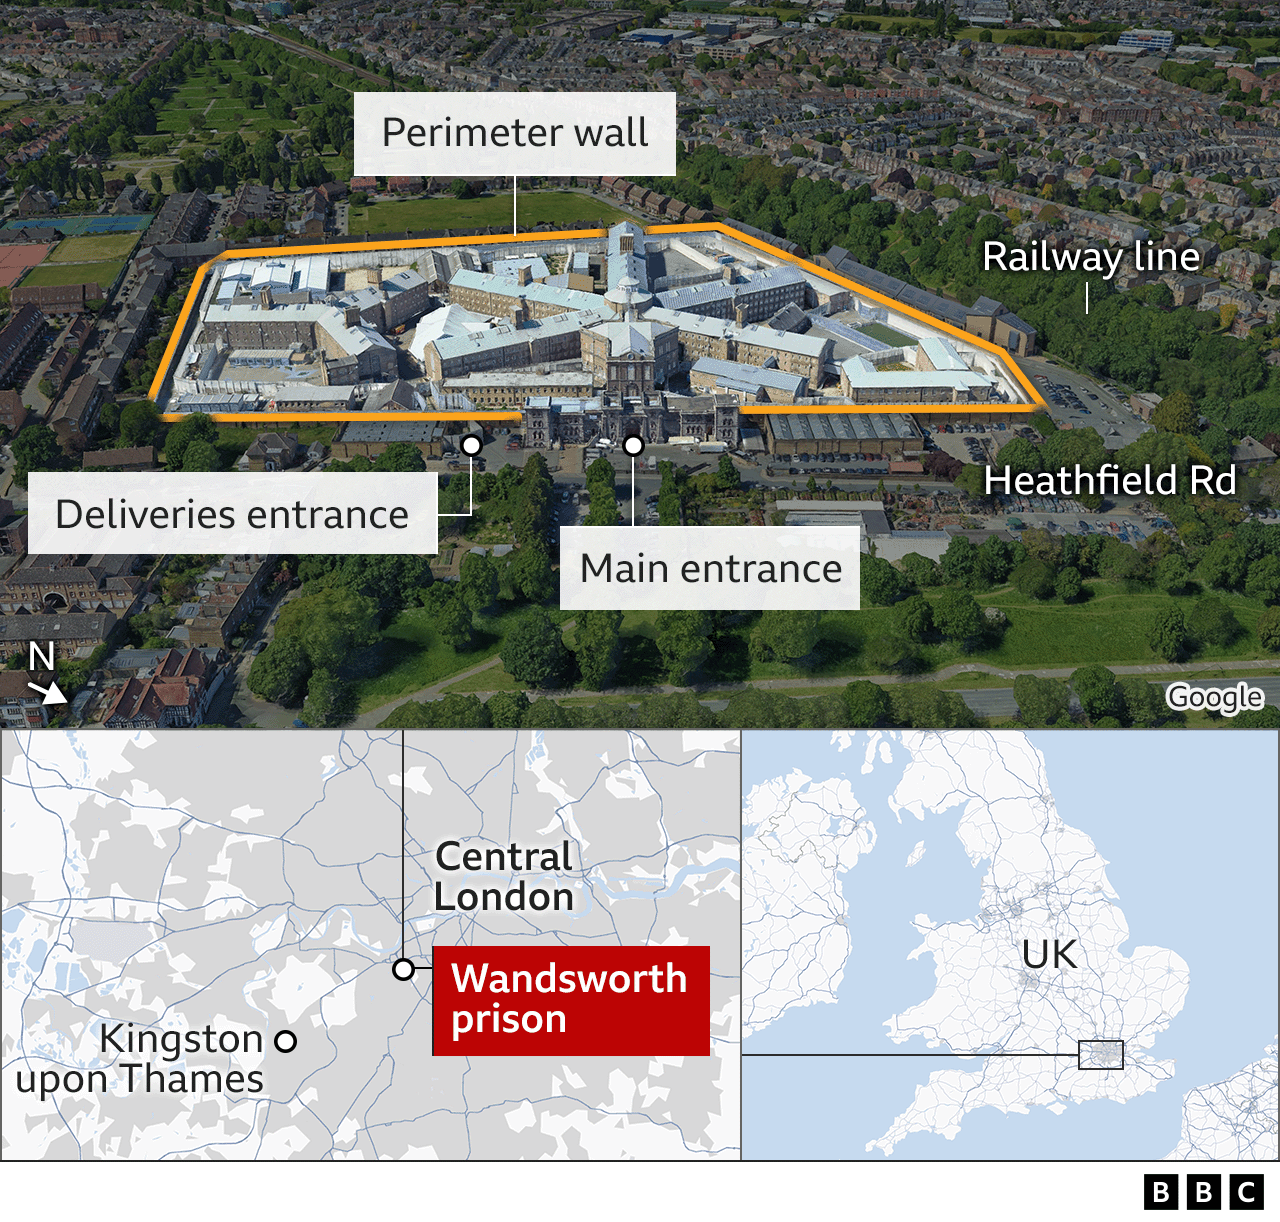 A graphic showing the layout of HMP Wandsworth